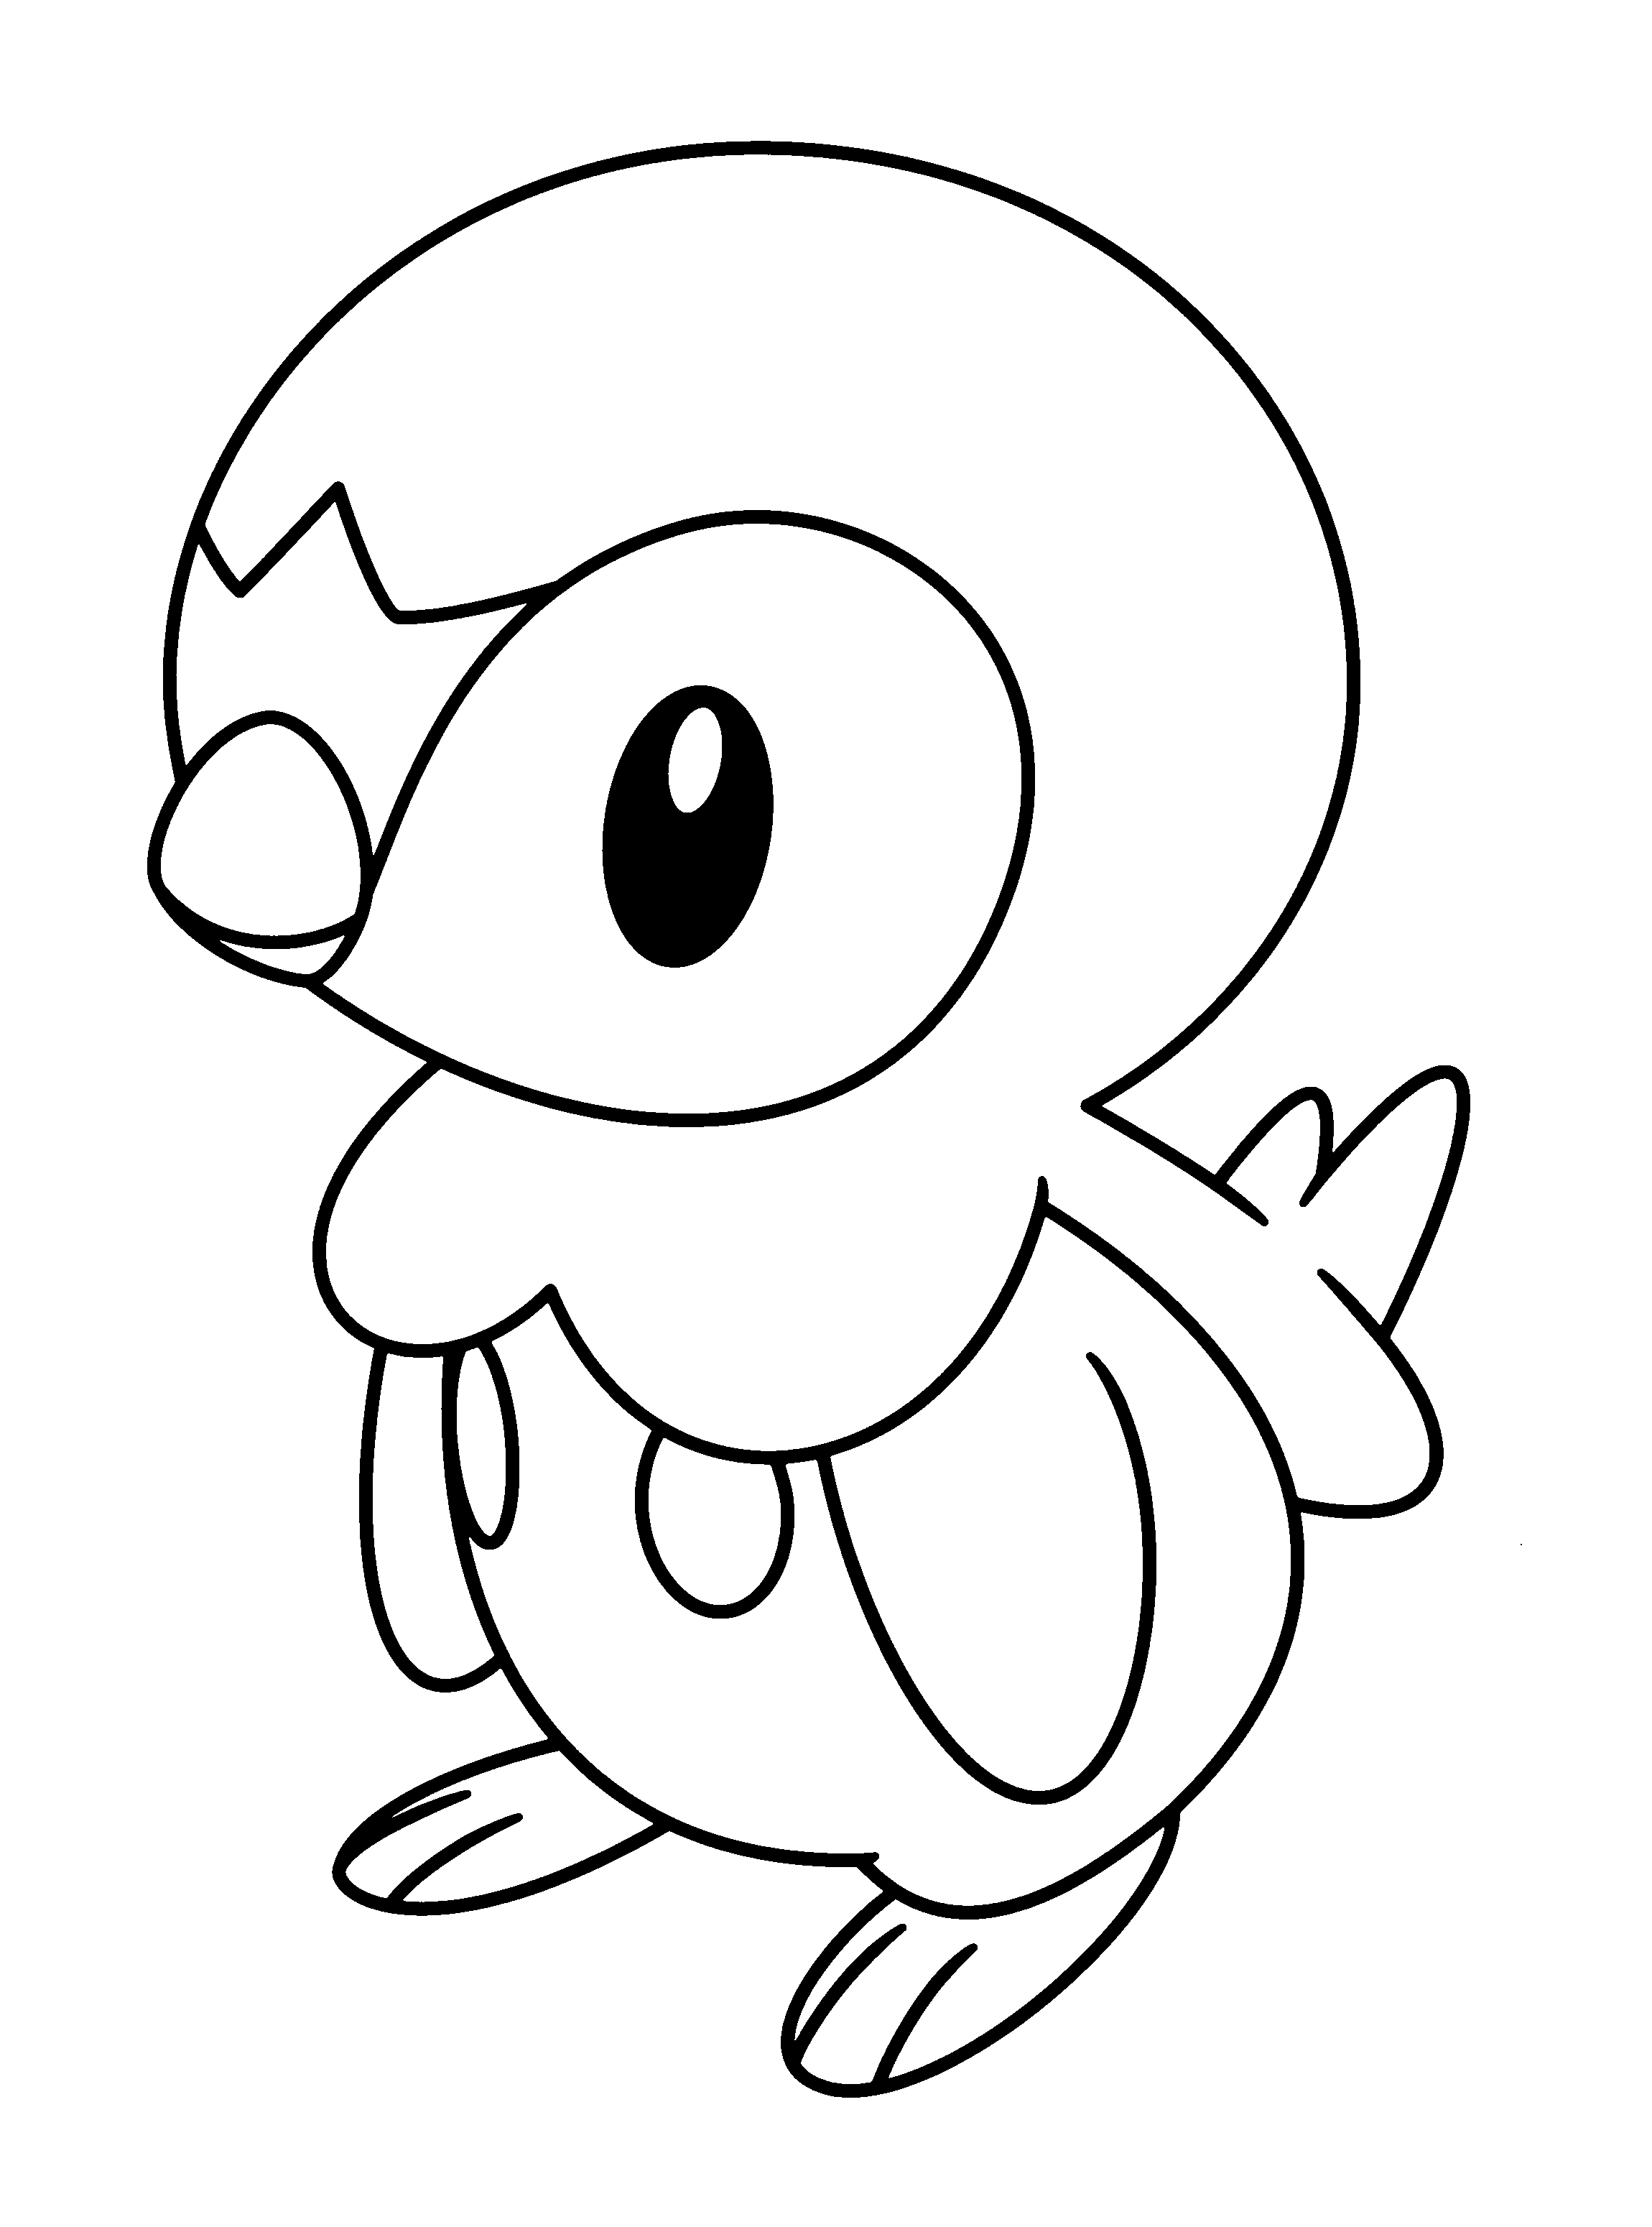 Pokemon Colouring Pages Free - High Quality Coloring Pages